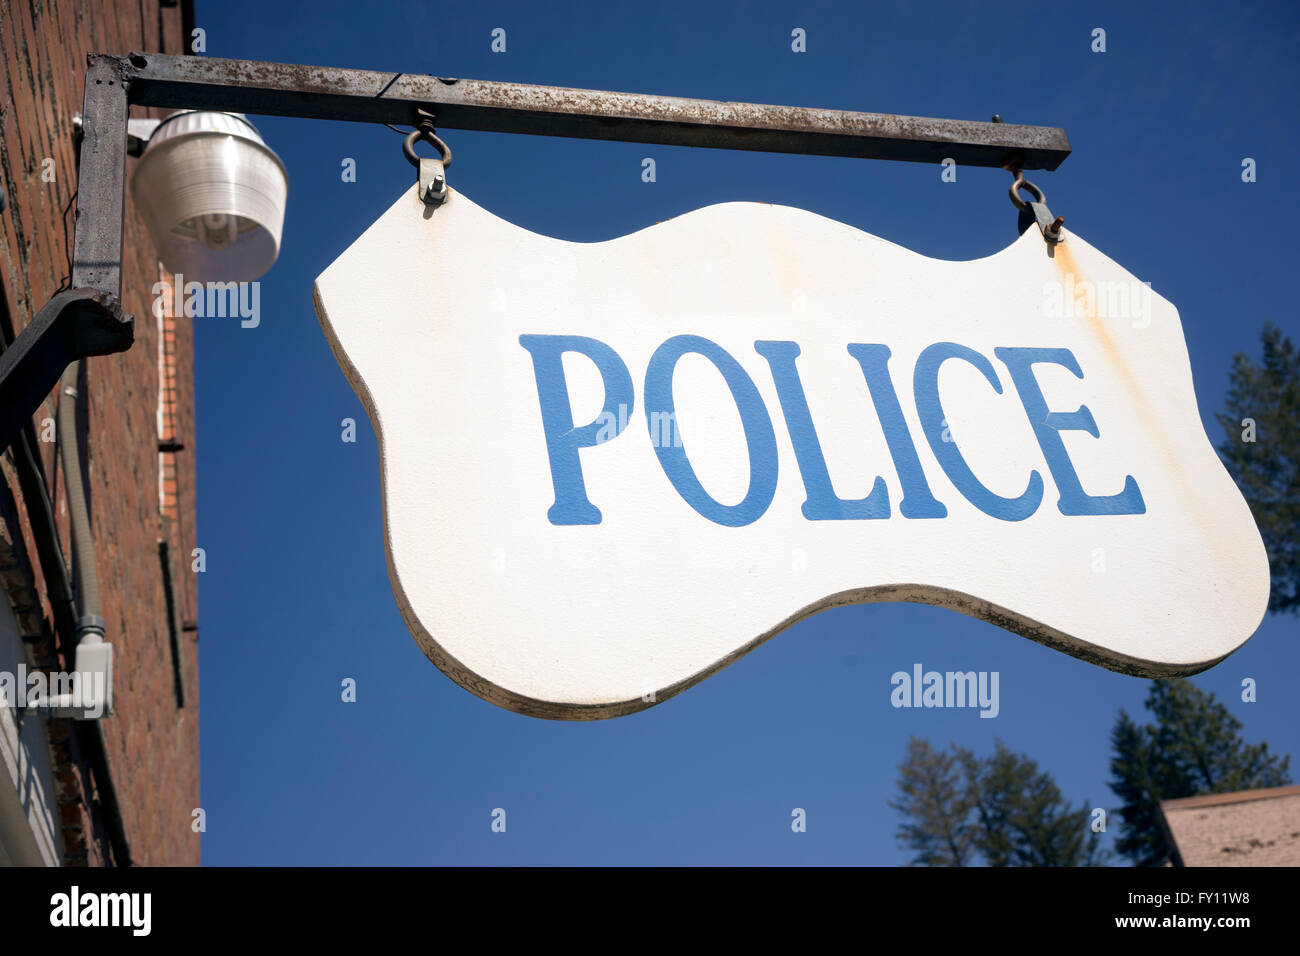 Police Department Sign Small Rural Town America Stock Photo